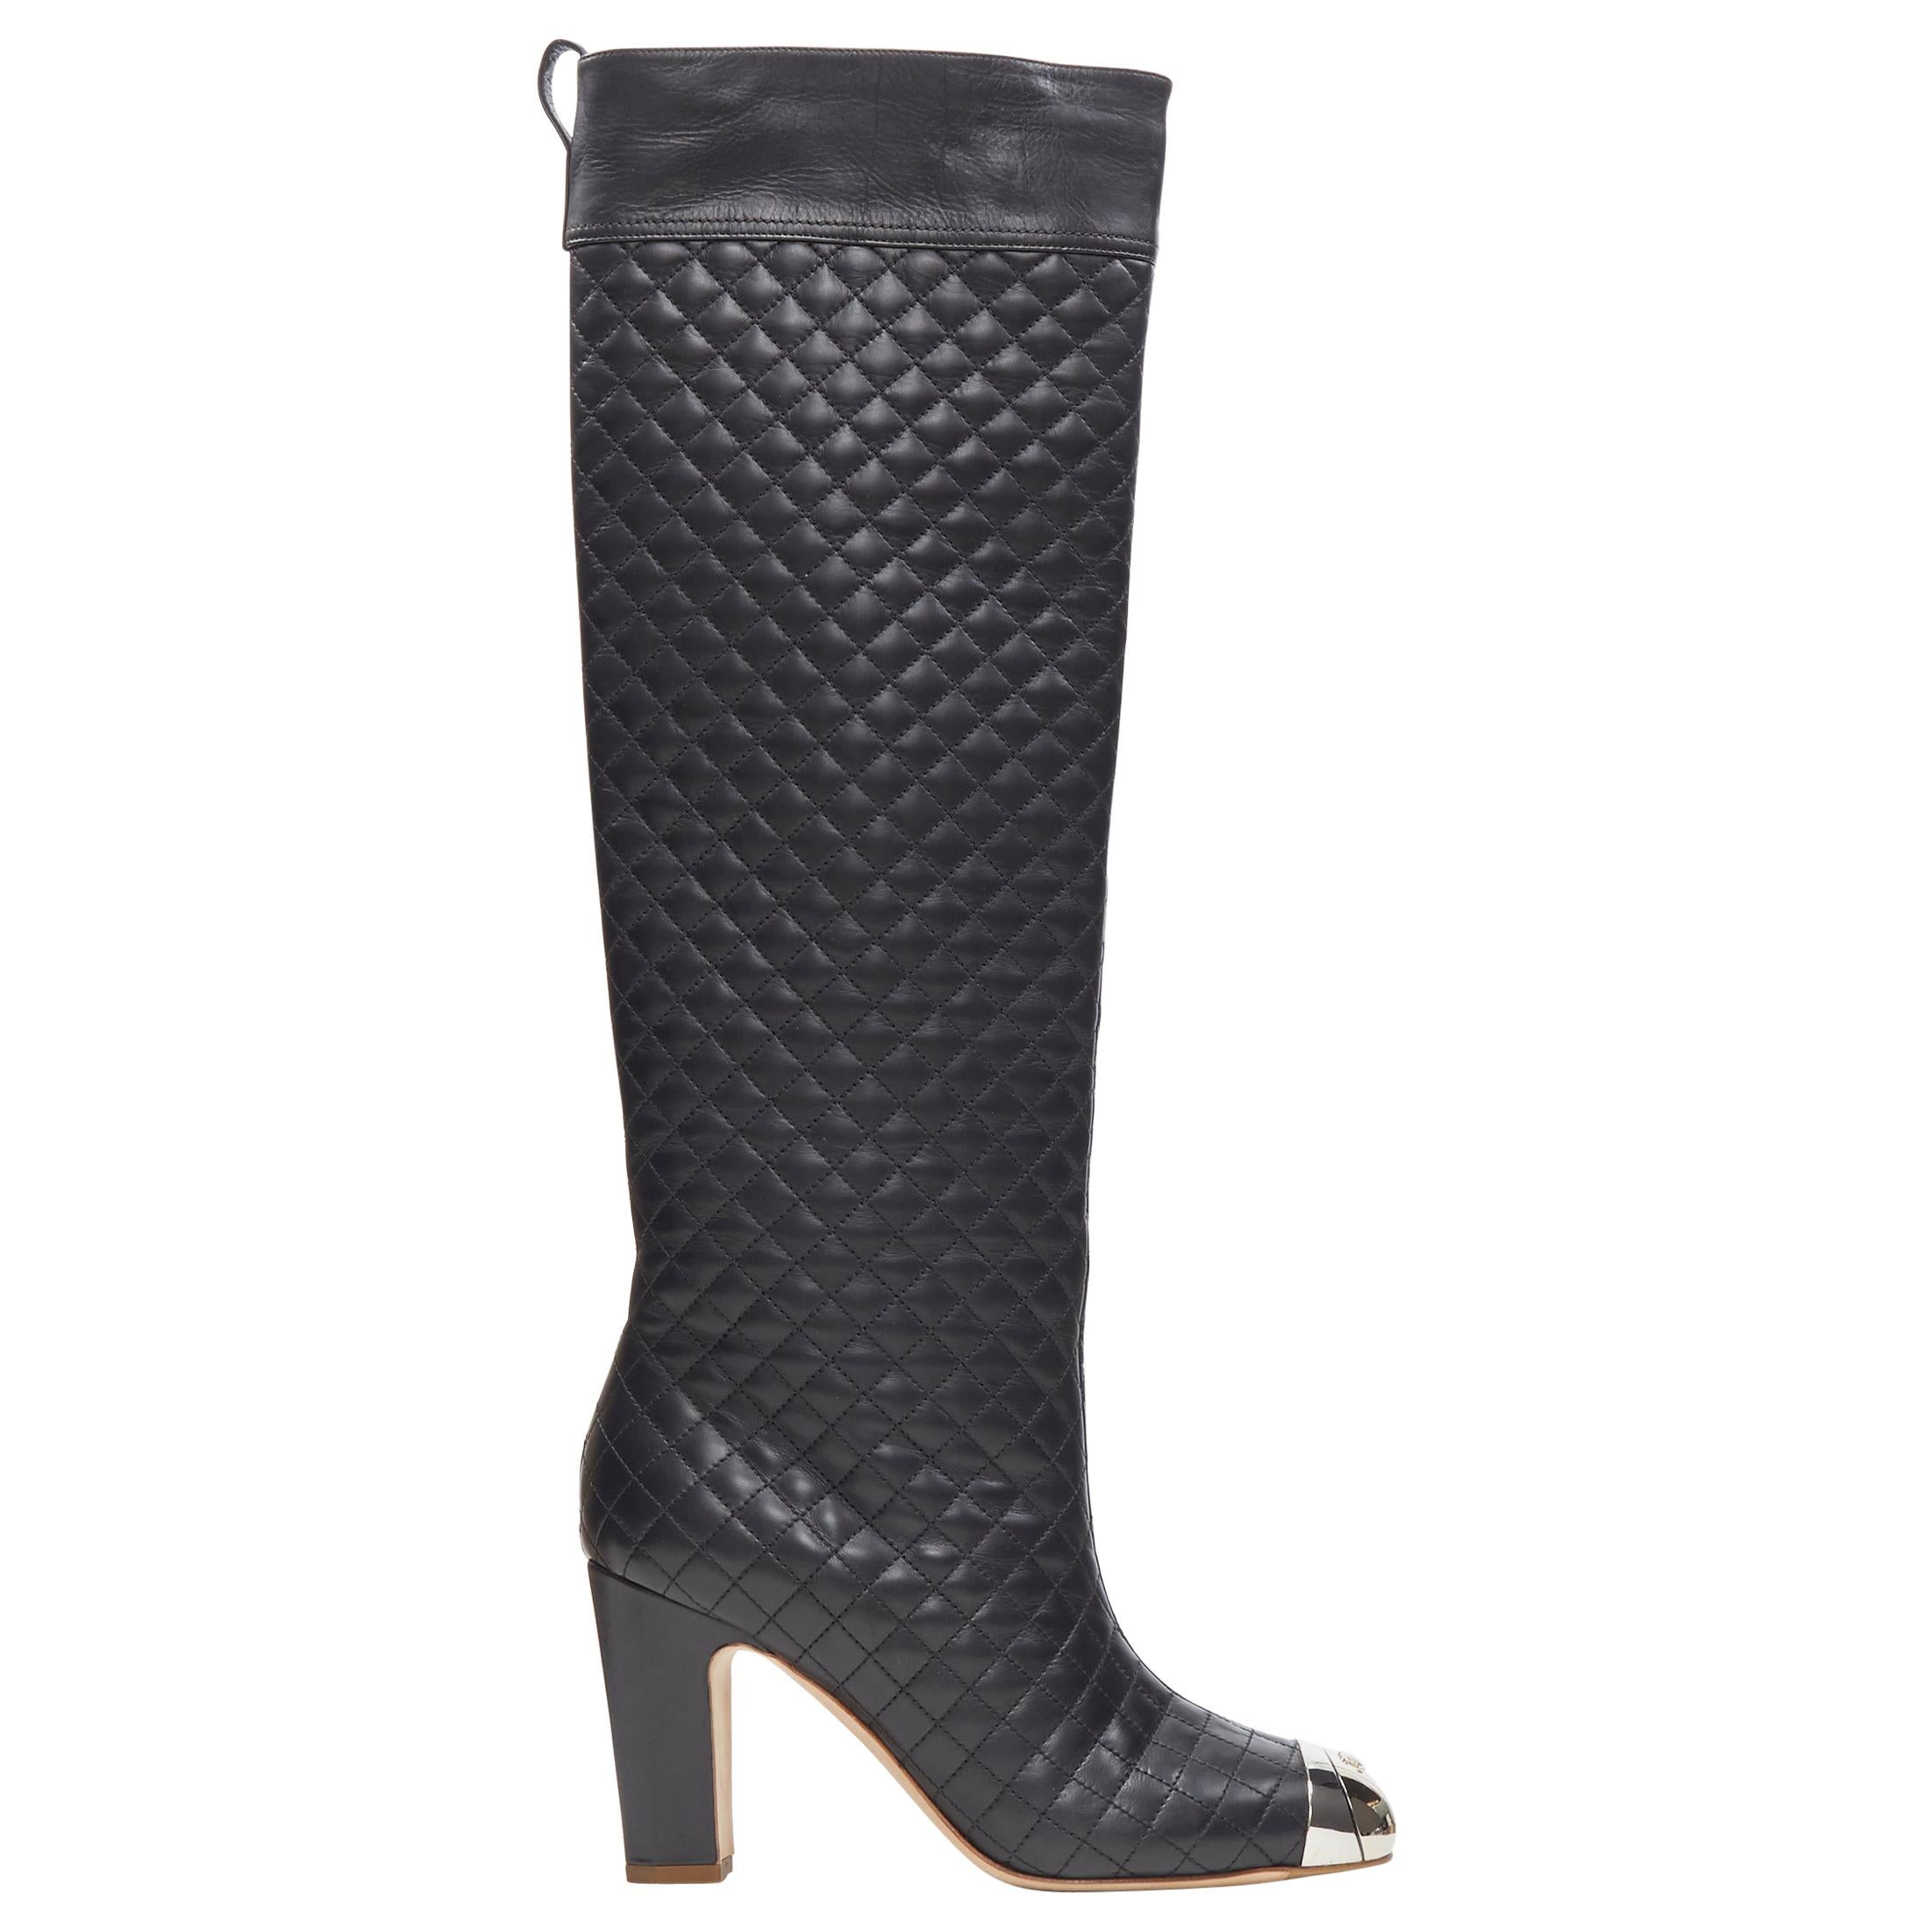 CHANEL 12C black diamond quilted leather metal CC toe knee high